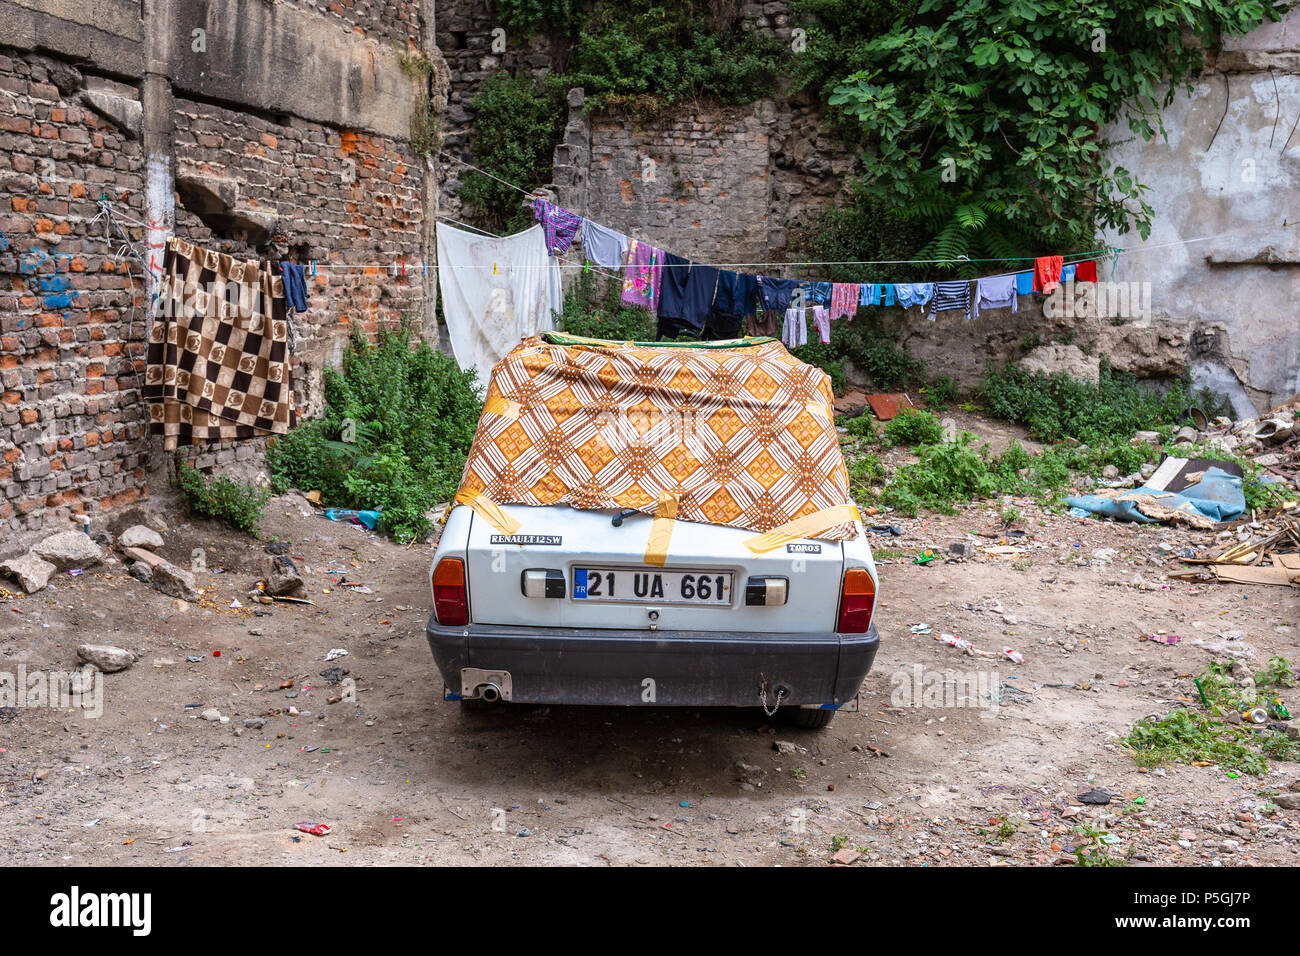 Residents prepare for the storm by covering their cars with blankets or protective materials expect strong thunder, heavy hail in Istanbul, Turkey. Stock Photo